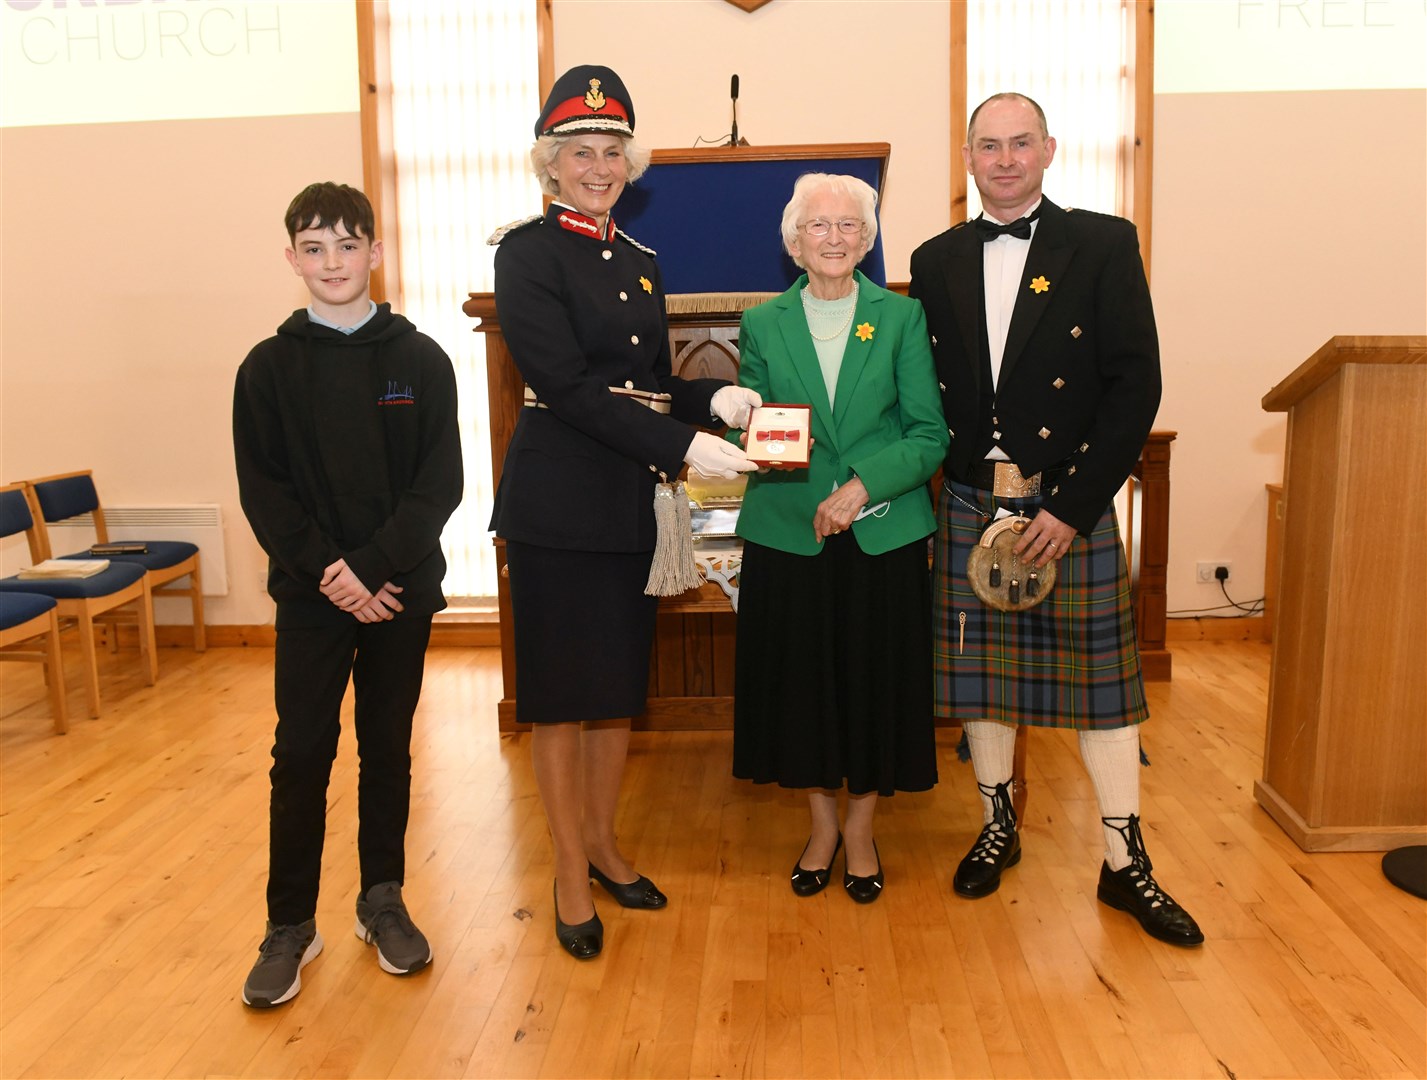 Joanie Whiteford (Lord Lieutenant of Ross and Cromarty) presents Davina Gillies with the BEM, also in the picture grandson Calum Gillies (left) and son Ruairidh Gillies.